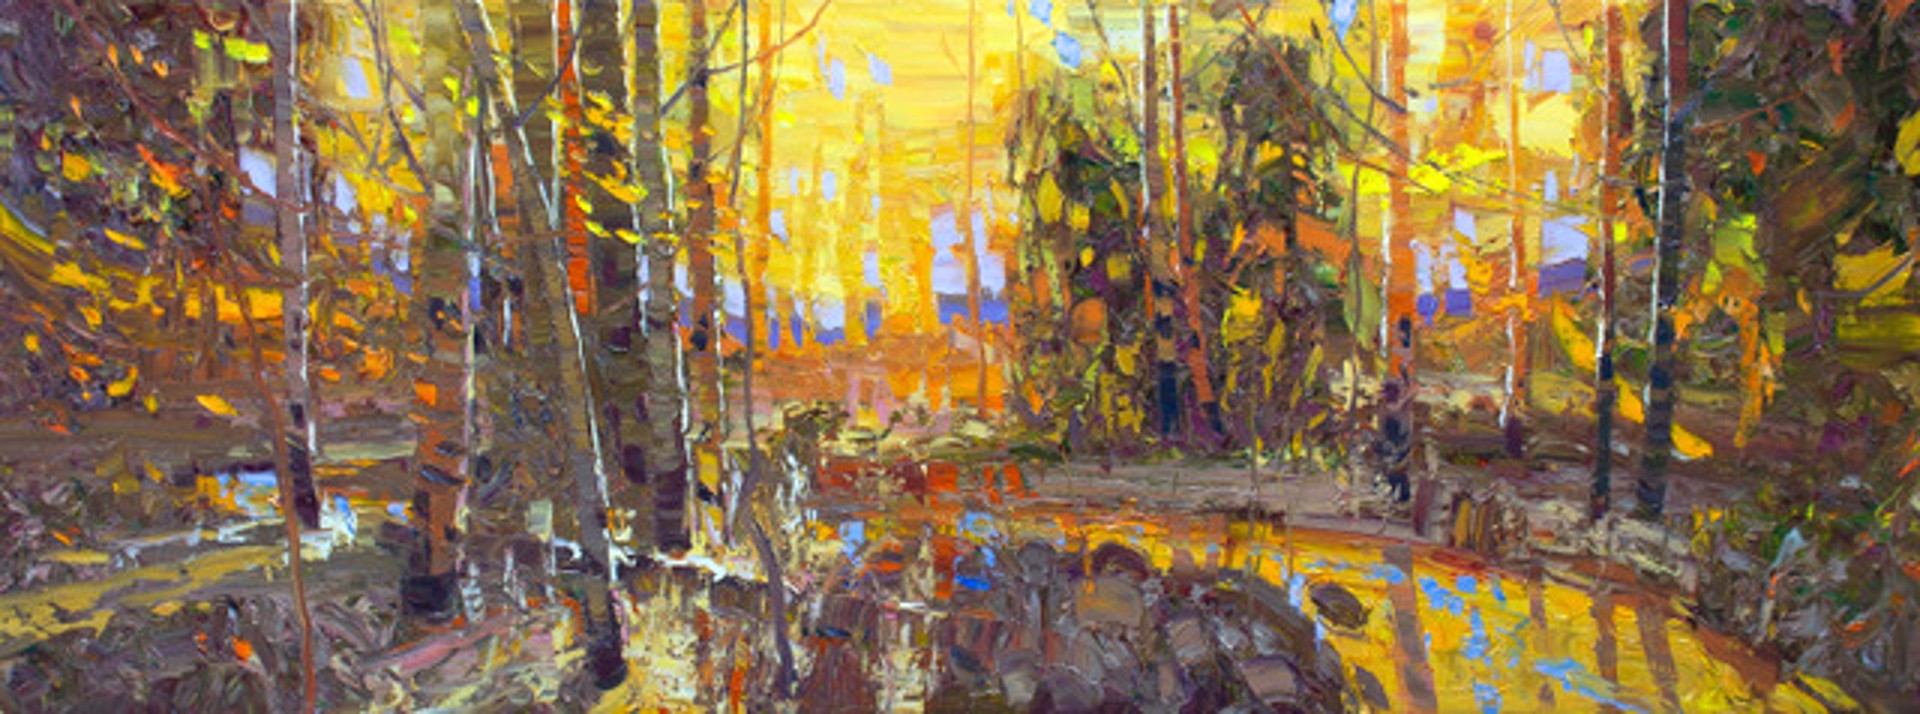 A Palette Knife Oil Painting Of A Fall Forest With Aspens And A Creek By Silas Thompson At Gallery Wild